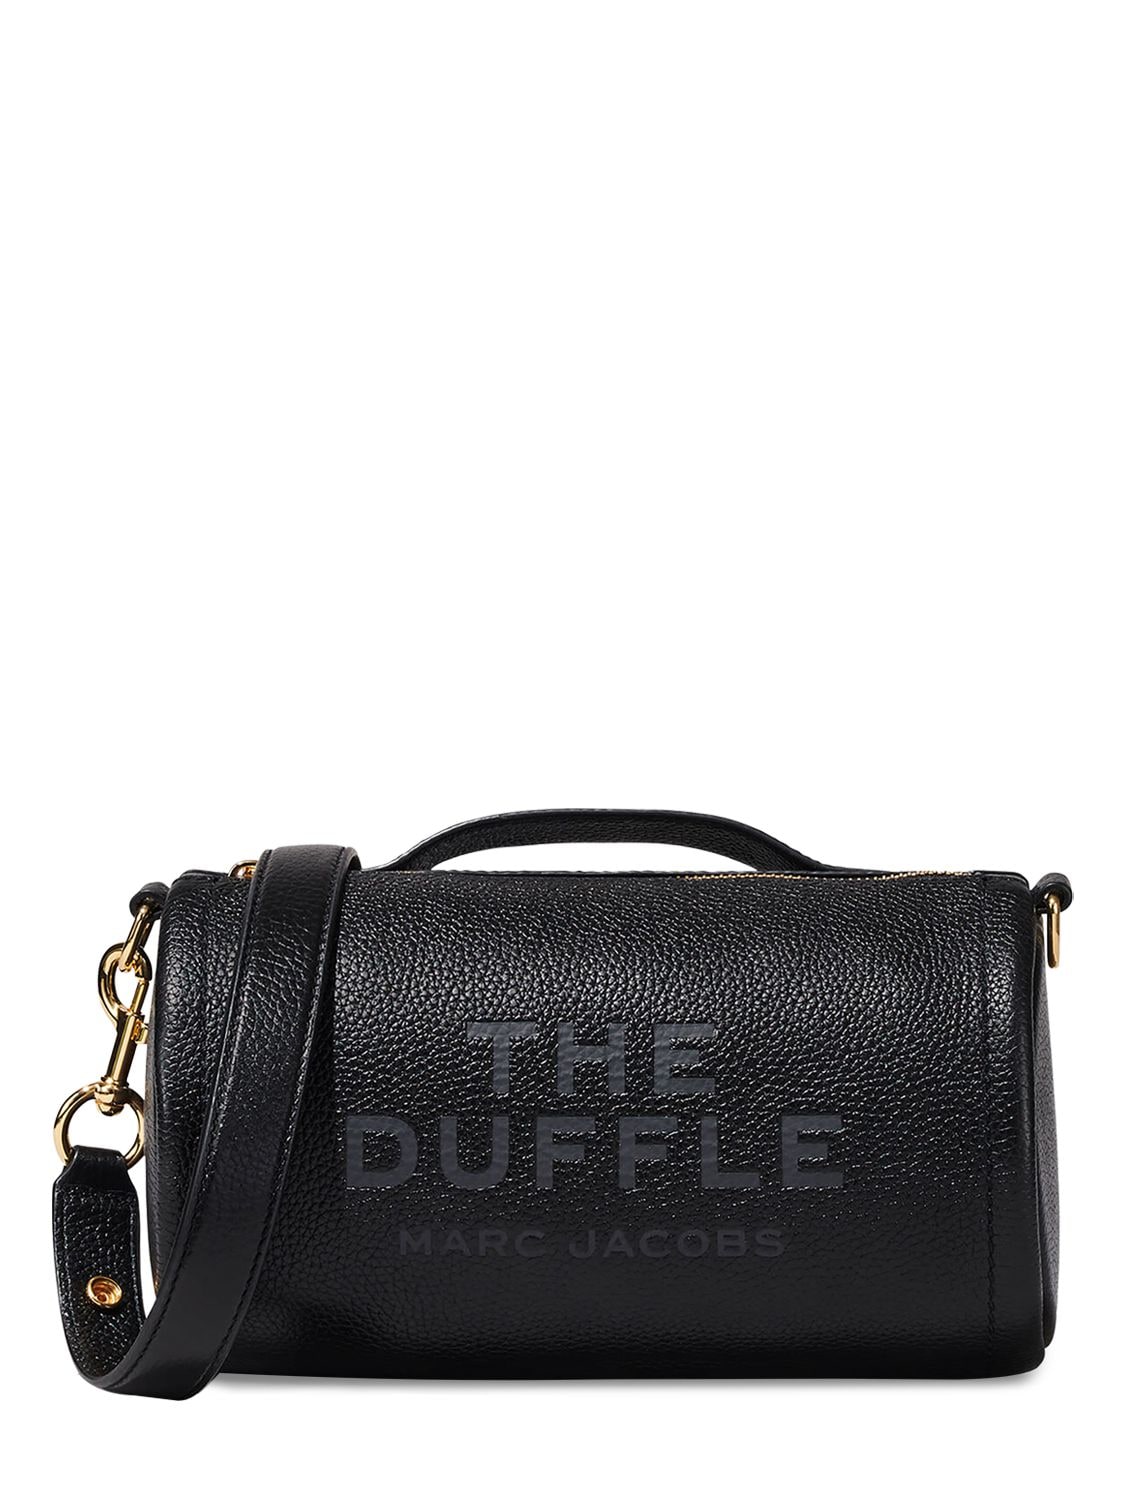 Marc Jacobs The Duffle Leather Bag In Black